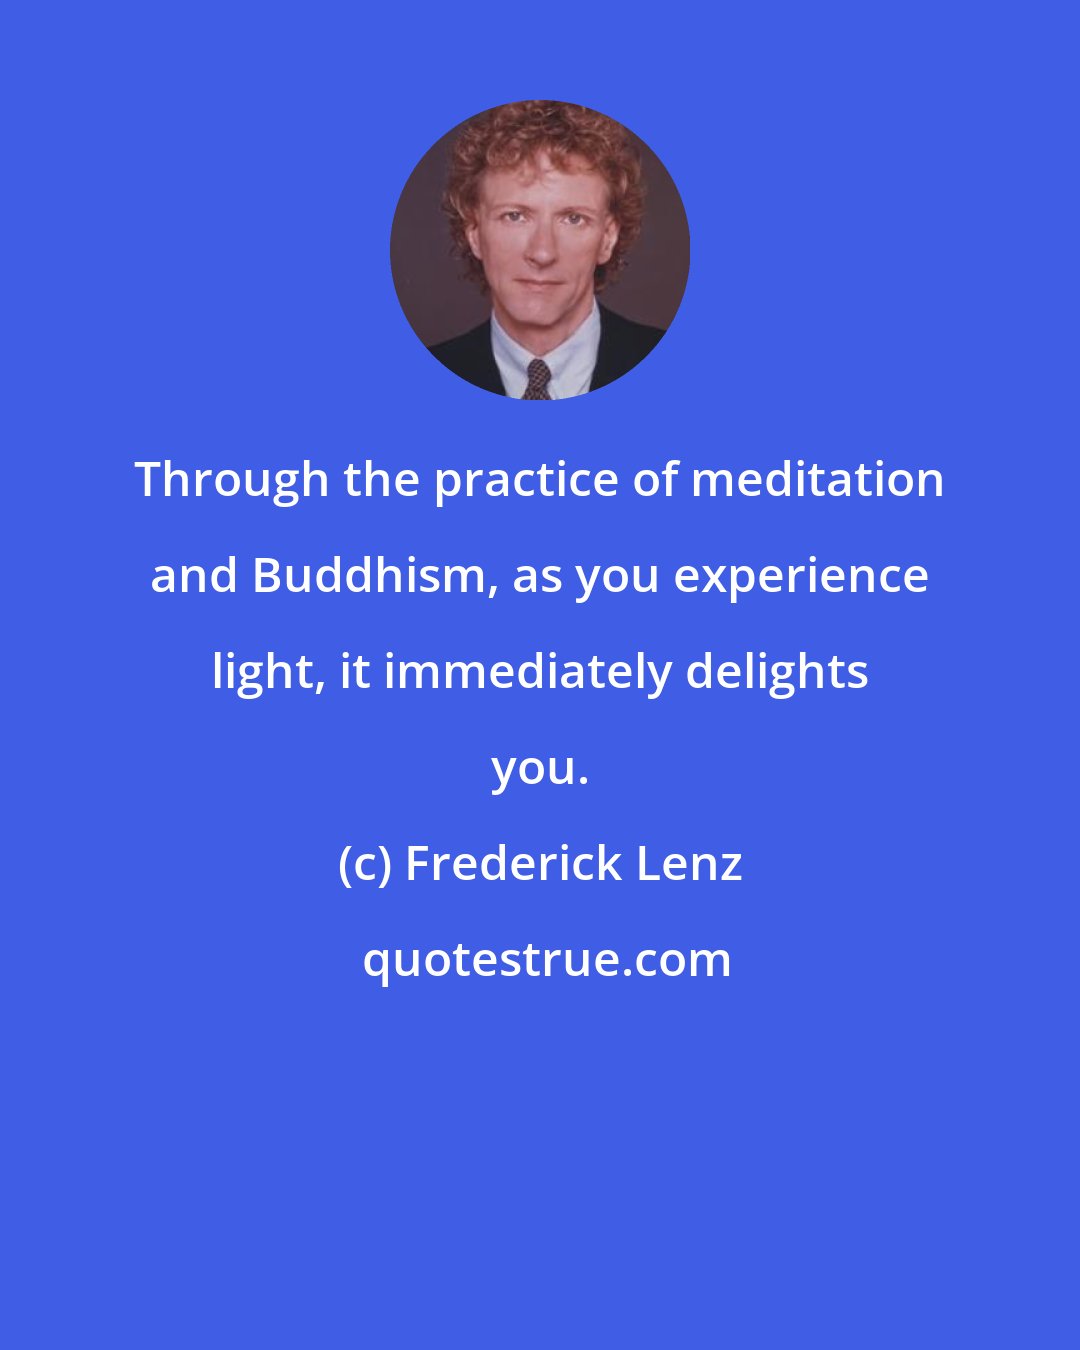 Frederick Lenz: Through the practice of meditation and Buddhism, as you experience light, it immediately delights you.